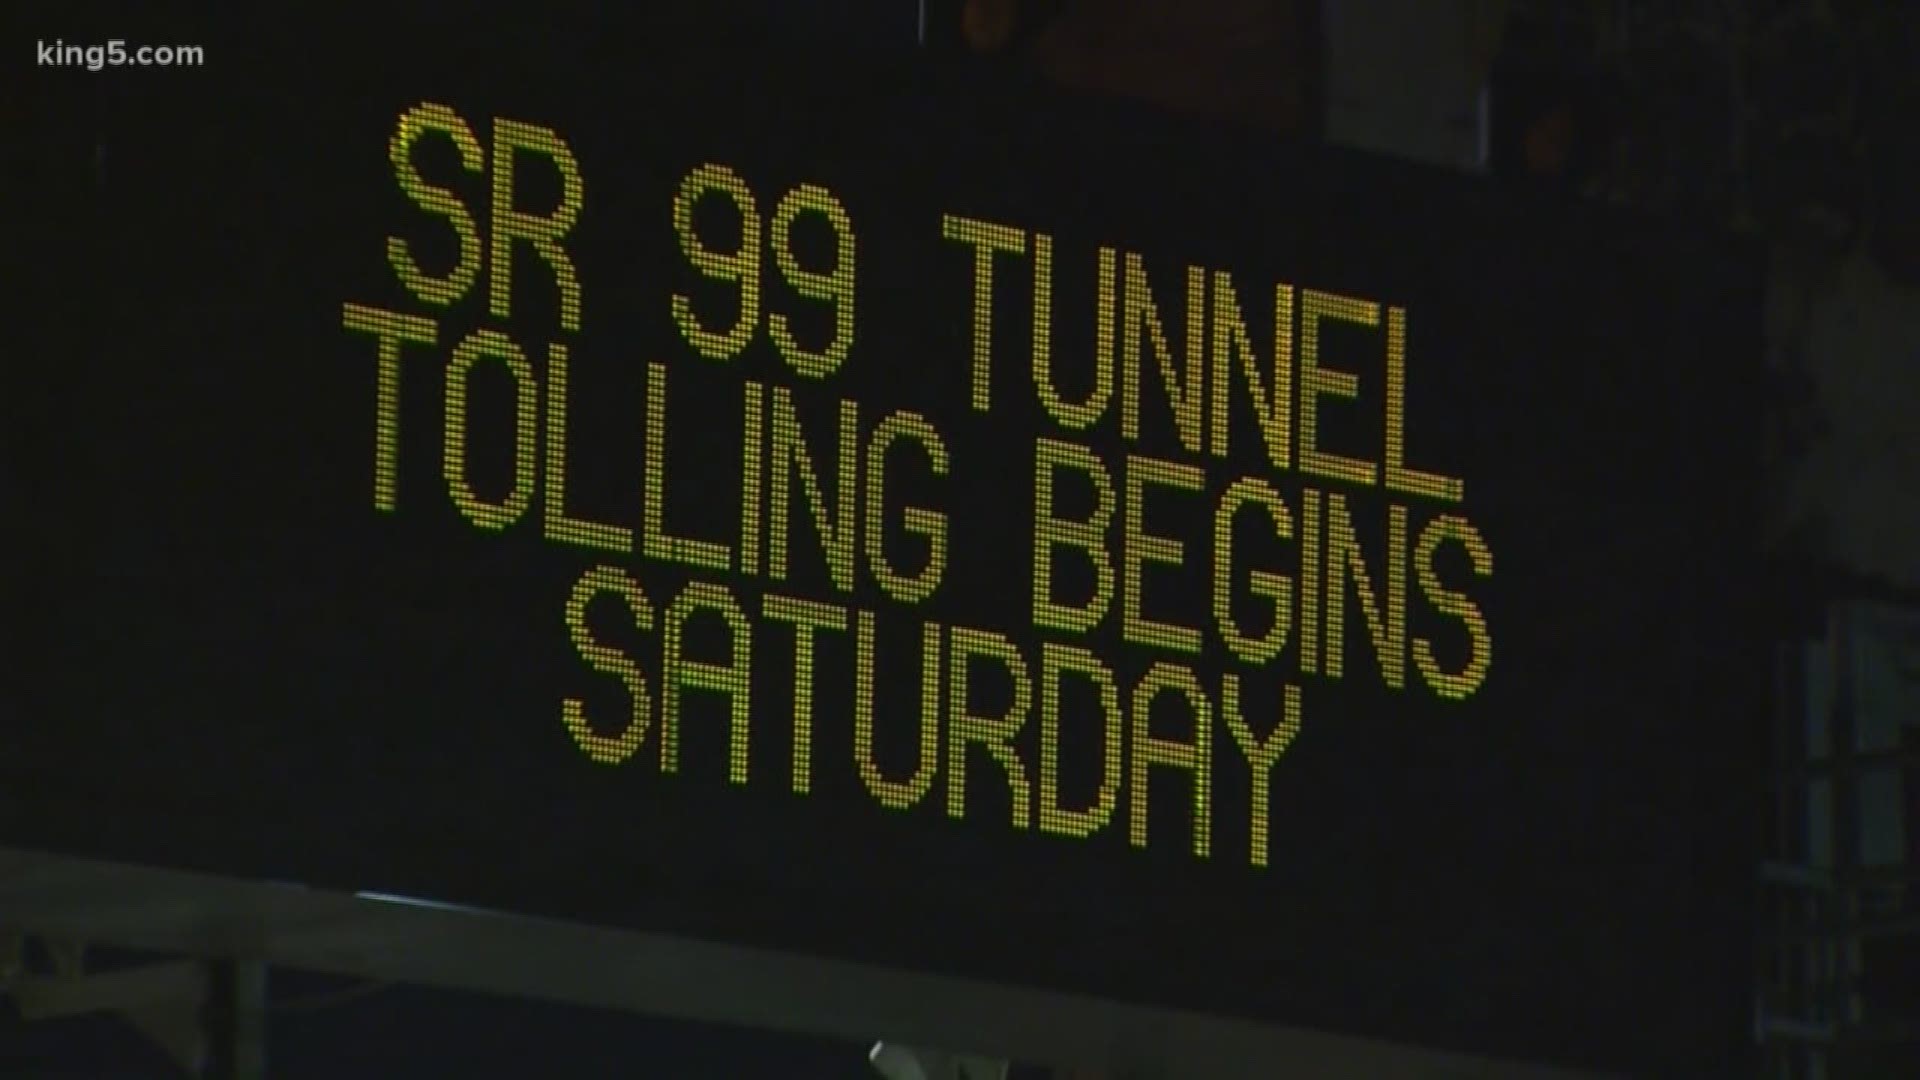 Tolling began on the SR 99 tunnel Saturday morning. Drivers will be charged between $1 and $2.25 depending on the time of day.